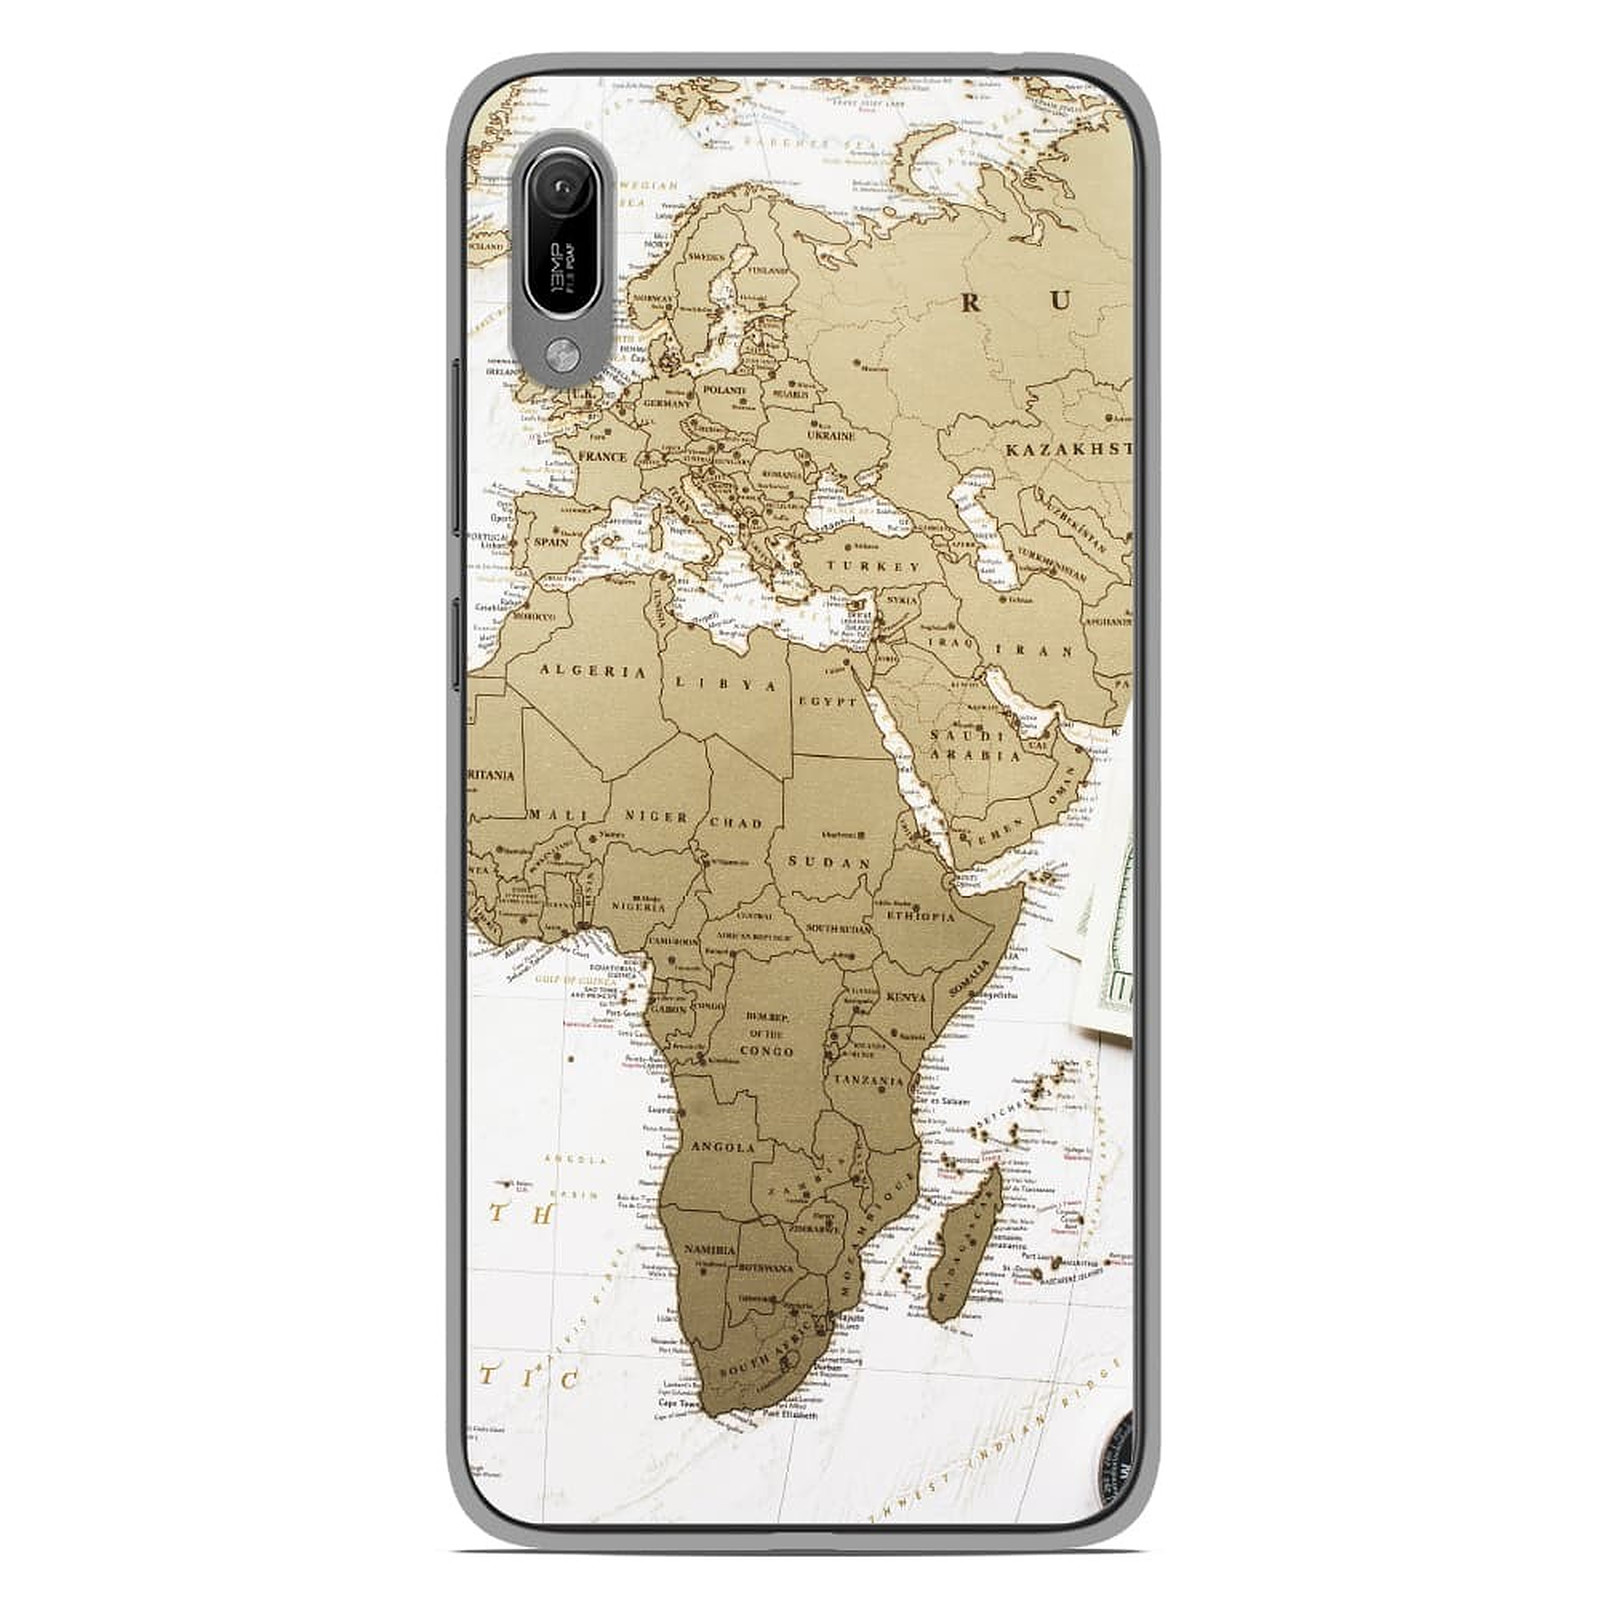 1001 Coques Coque silicone gel Huawei Y6 2019 motif Map Europe Afrique - Coque telephone 1001Coques